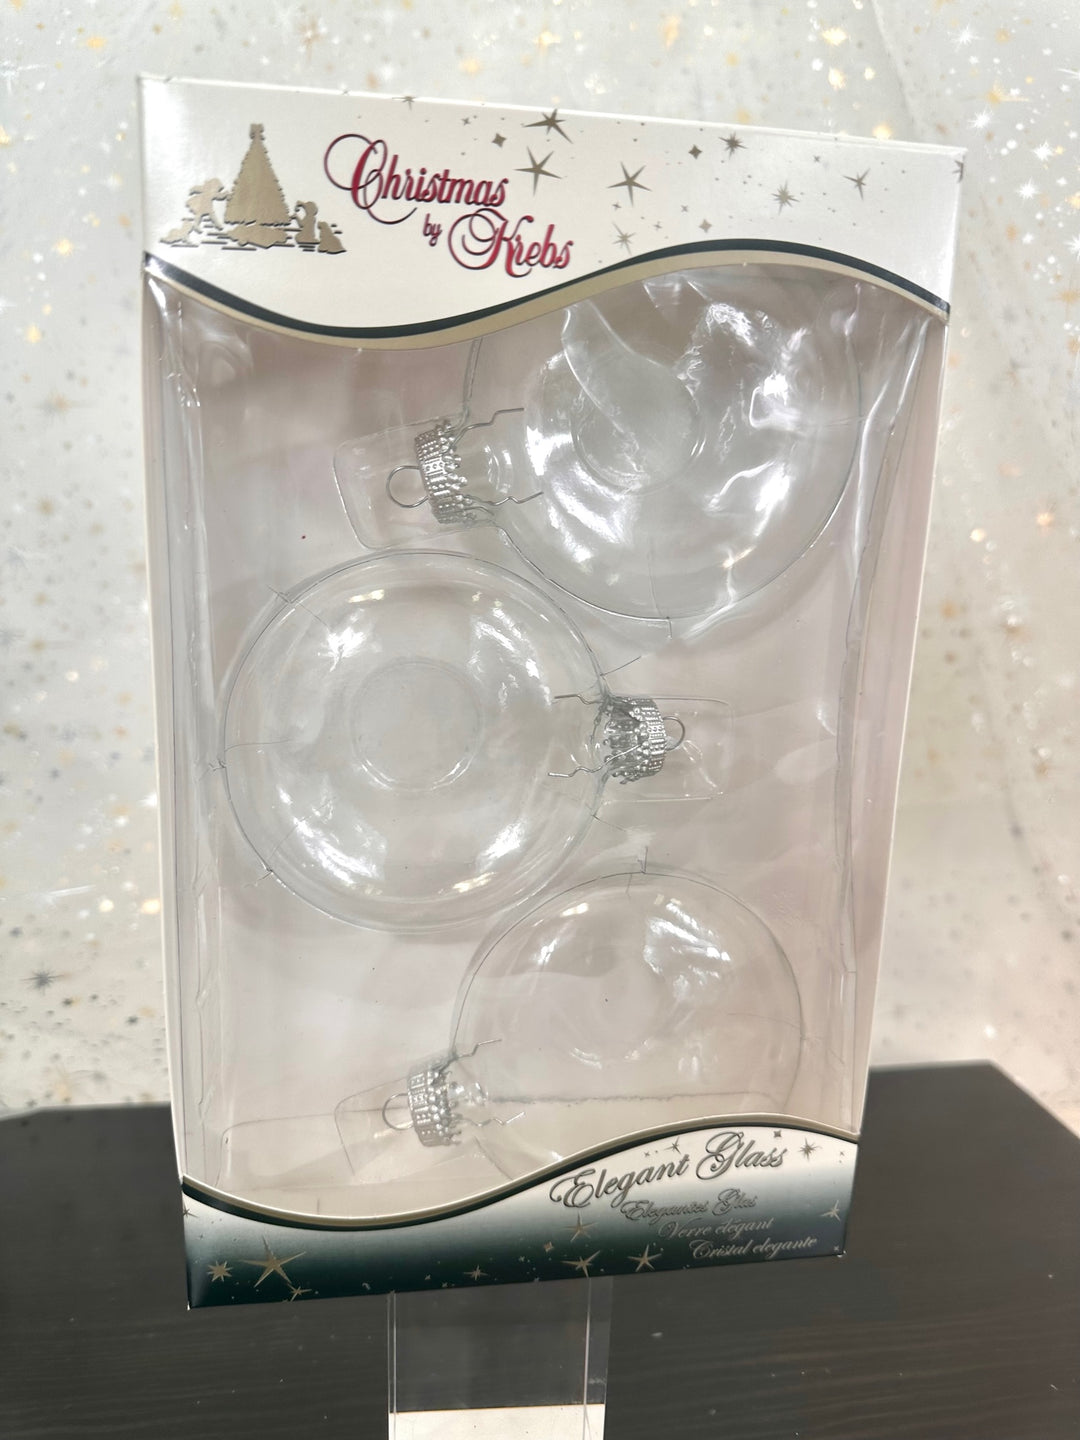 3" (76mm) Glass Disc Ornaments, Clear with Silver Crown Caps, 3/Box, 24/Case, 72 Pieces